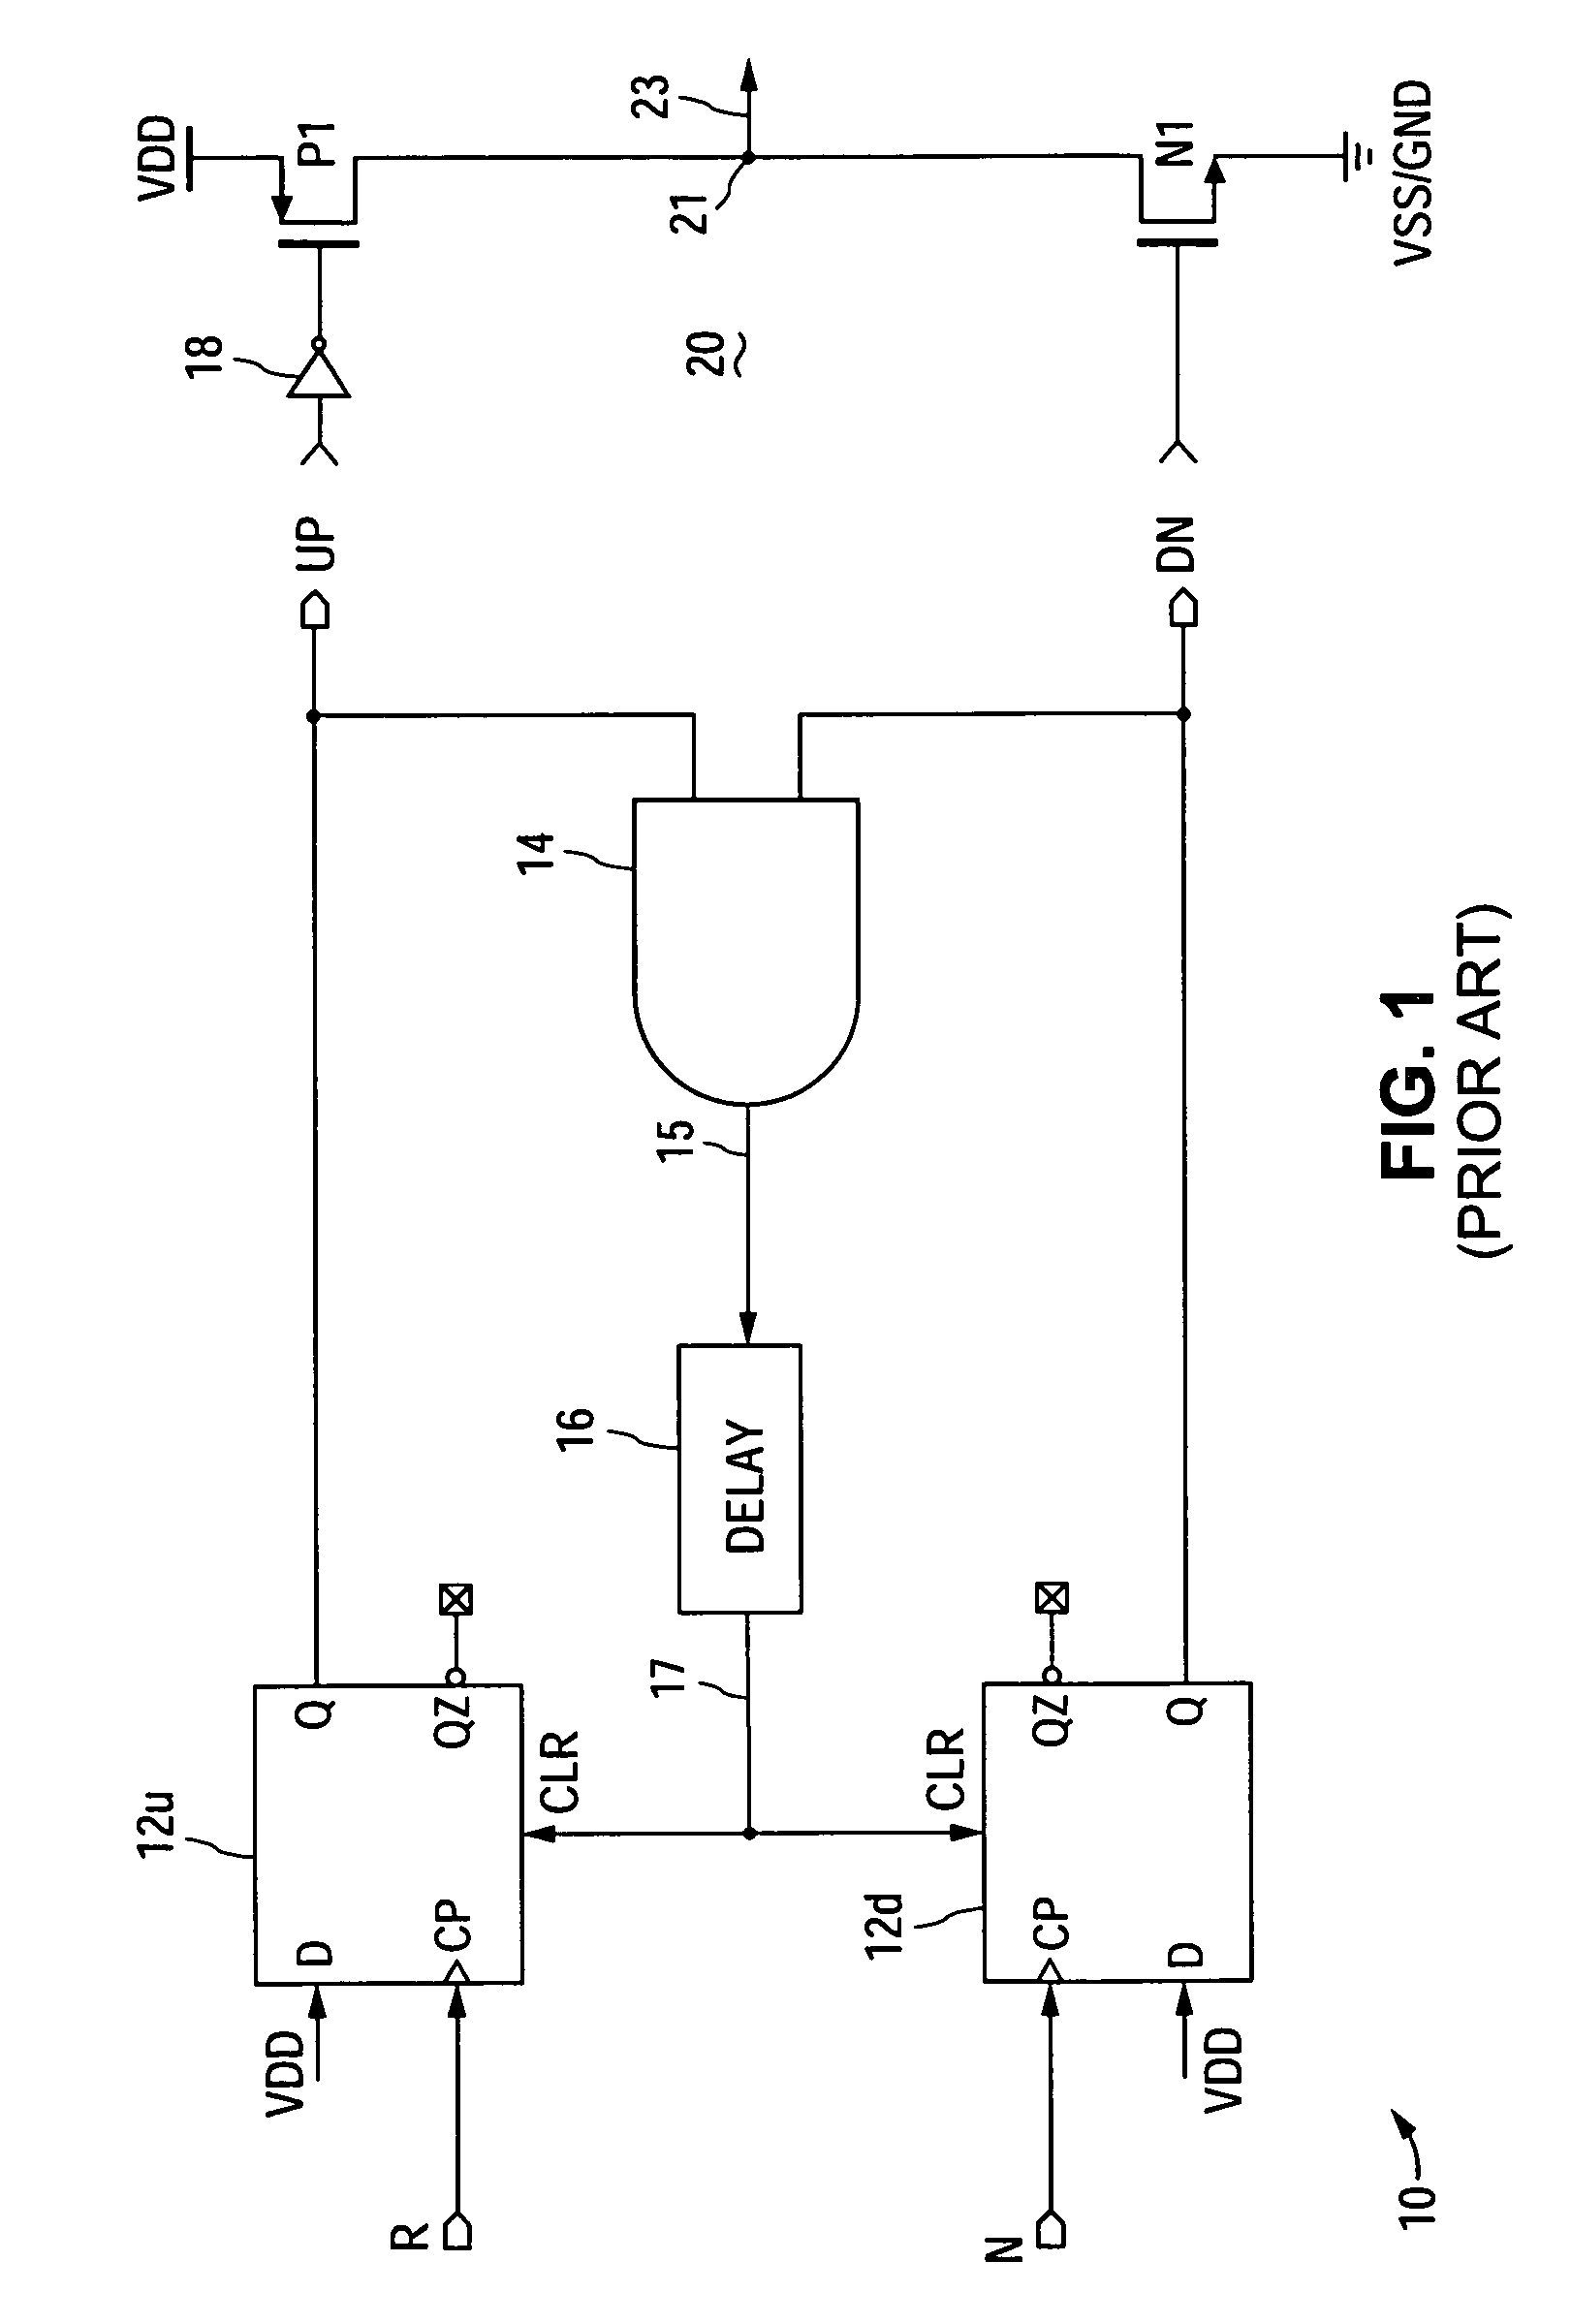 Phase-frequency detector with linear phase error gain near and during phase-lock in delta sigma phase-locked loop